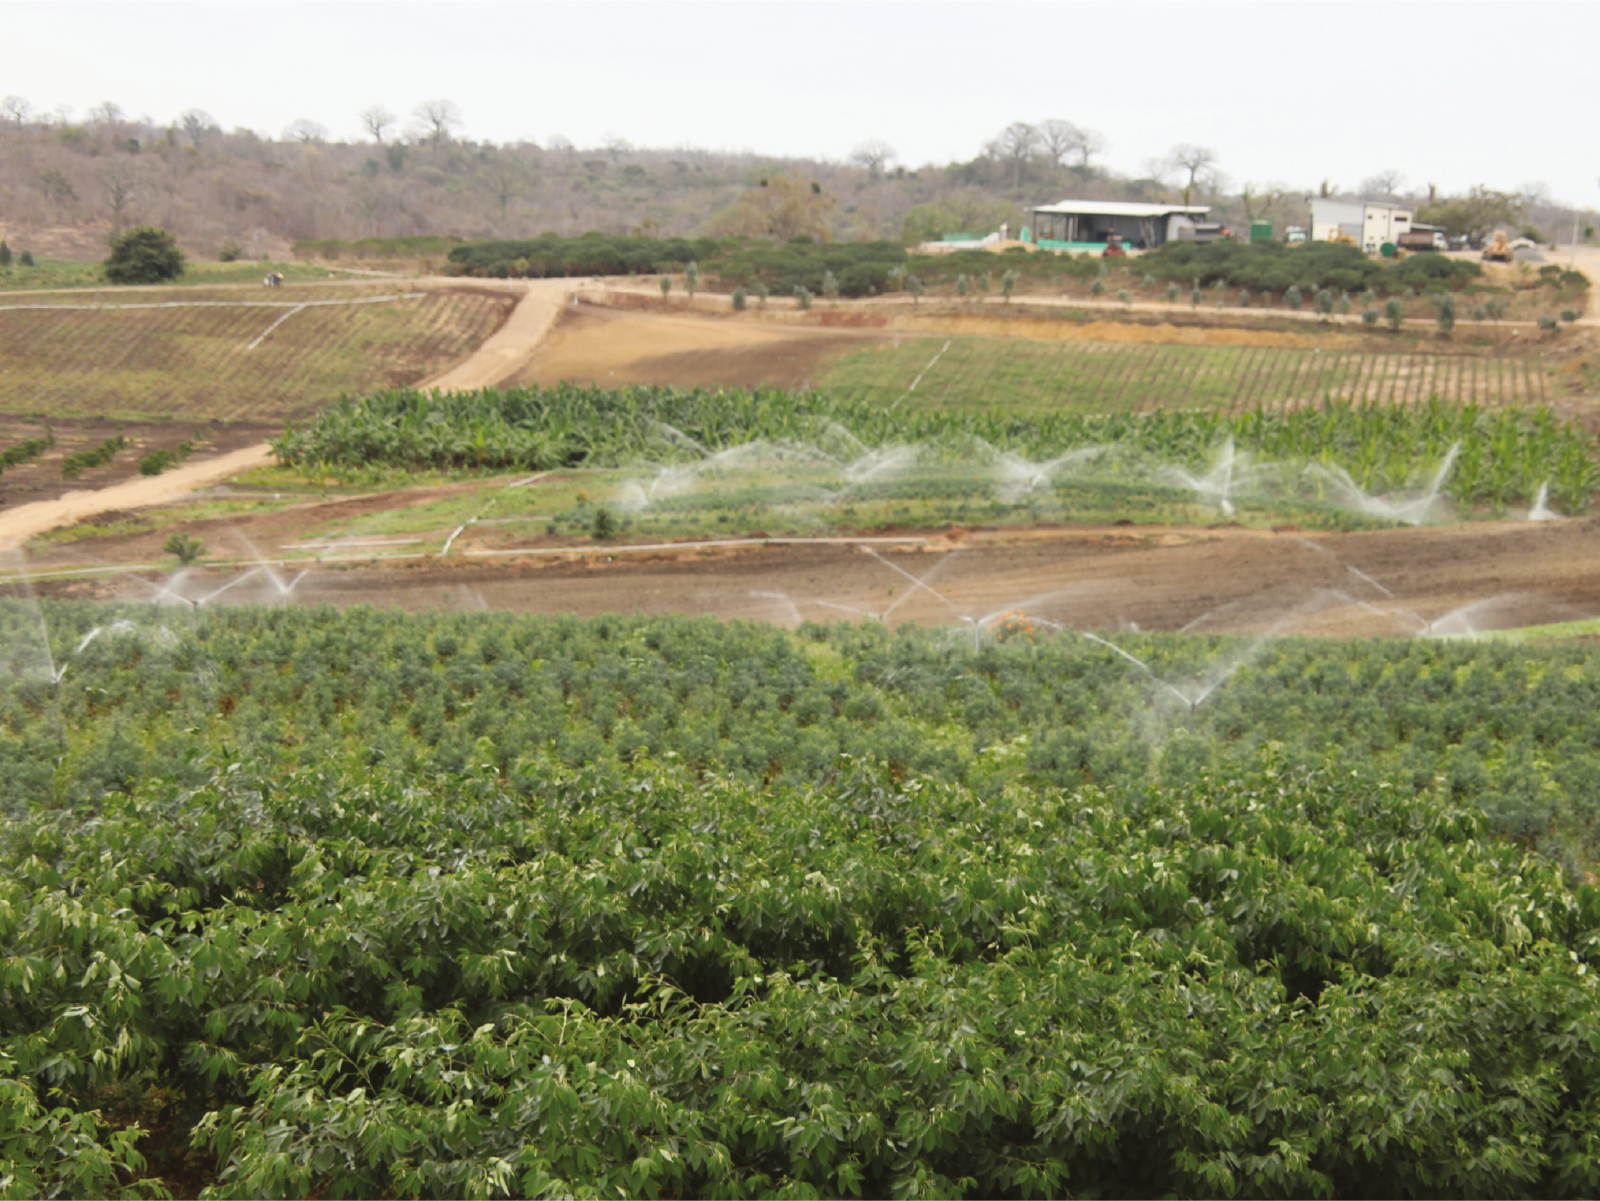 Reuse wastewater from the distillation process for irrigation